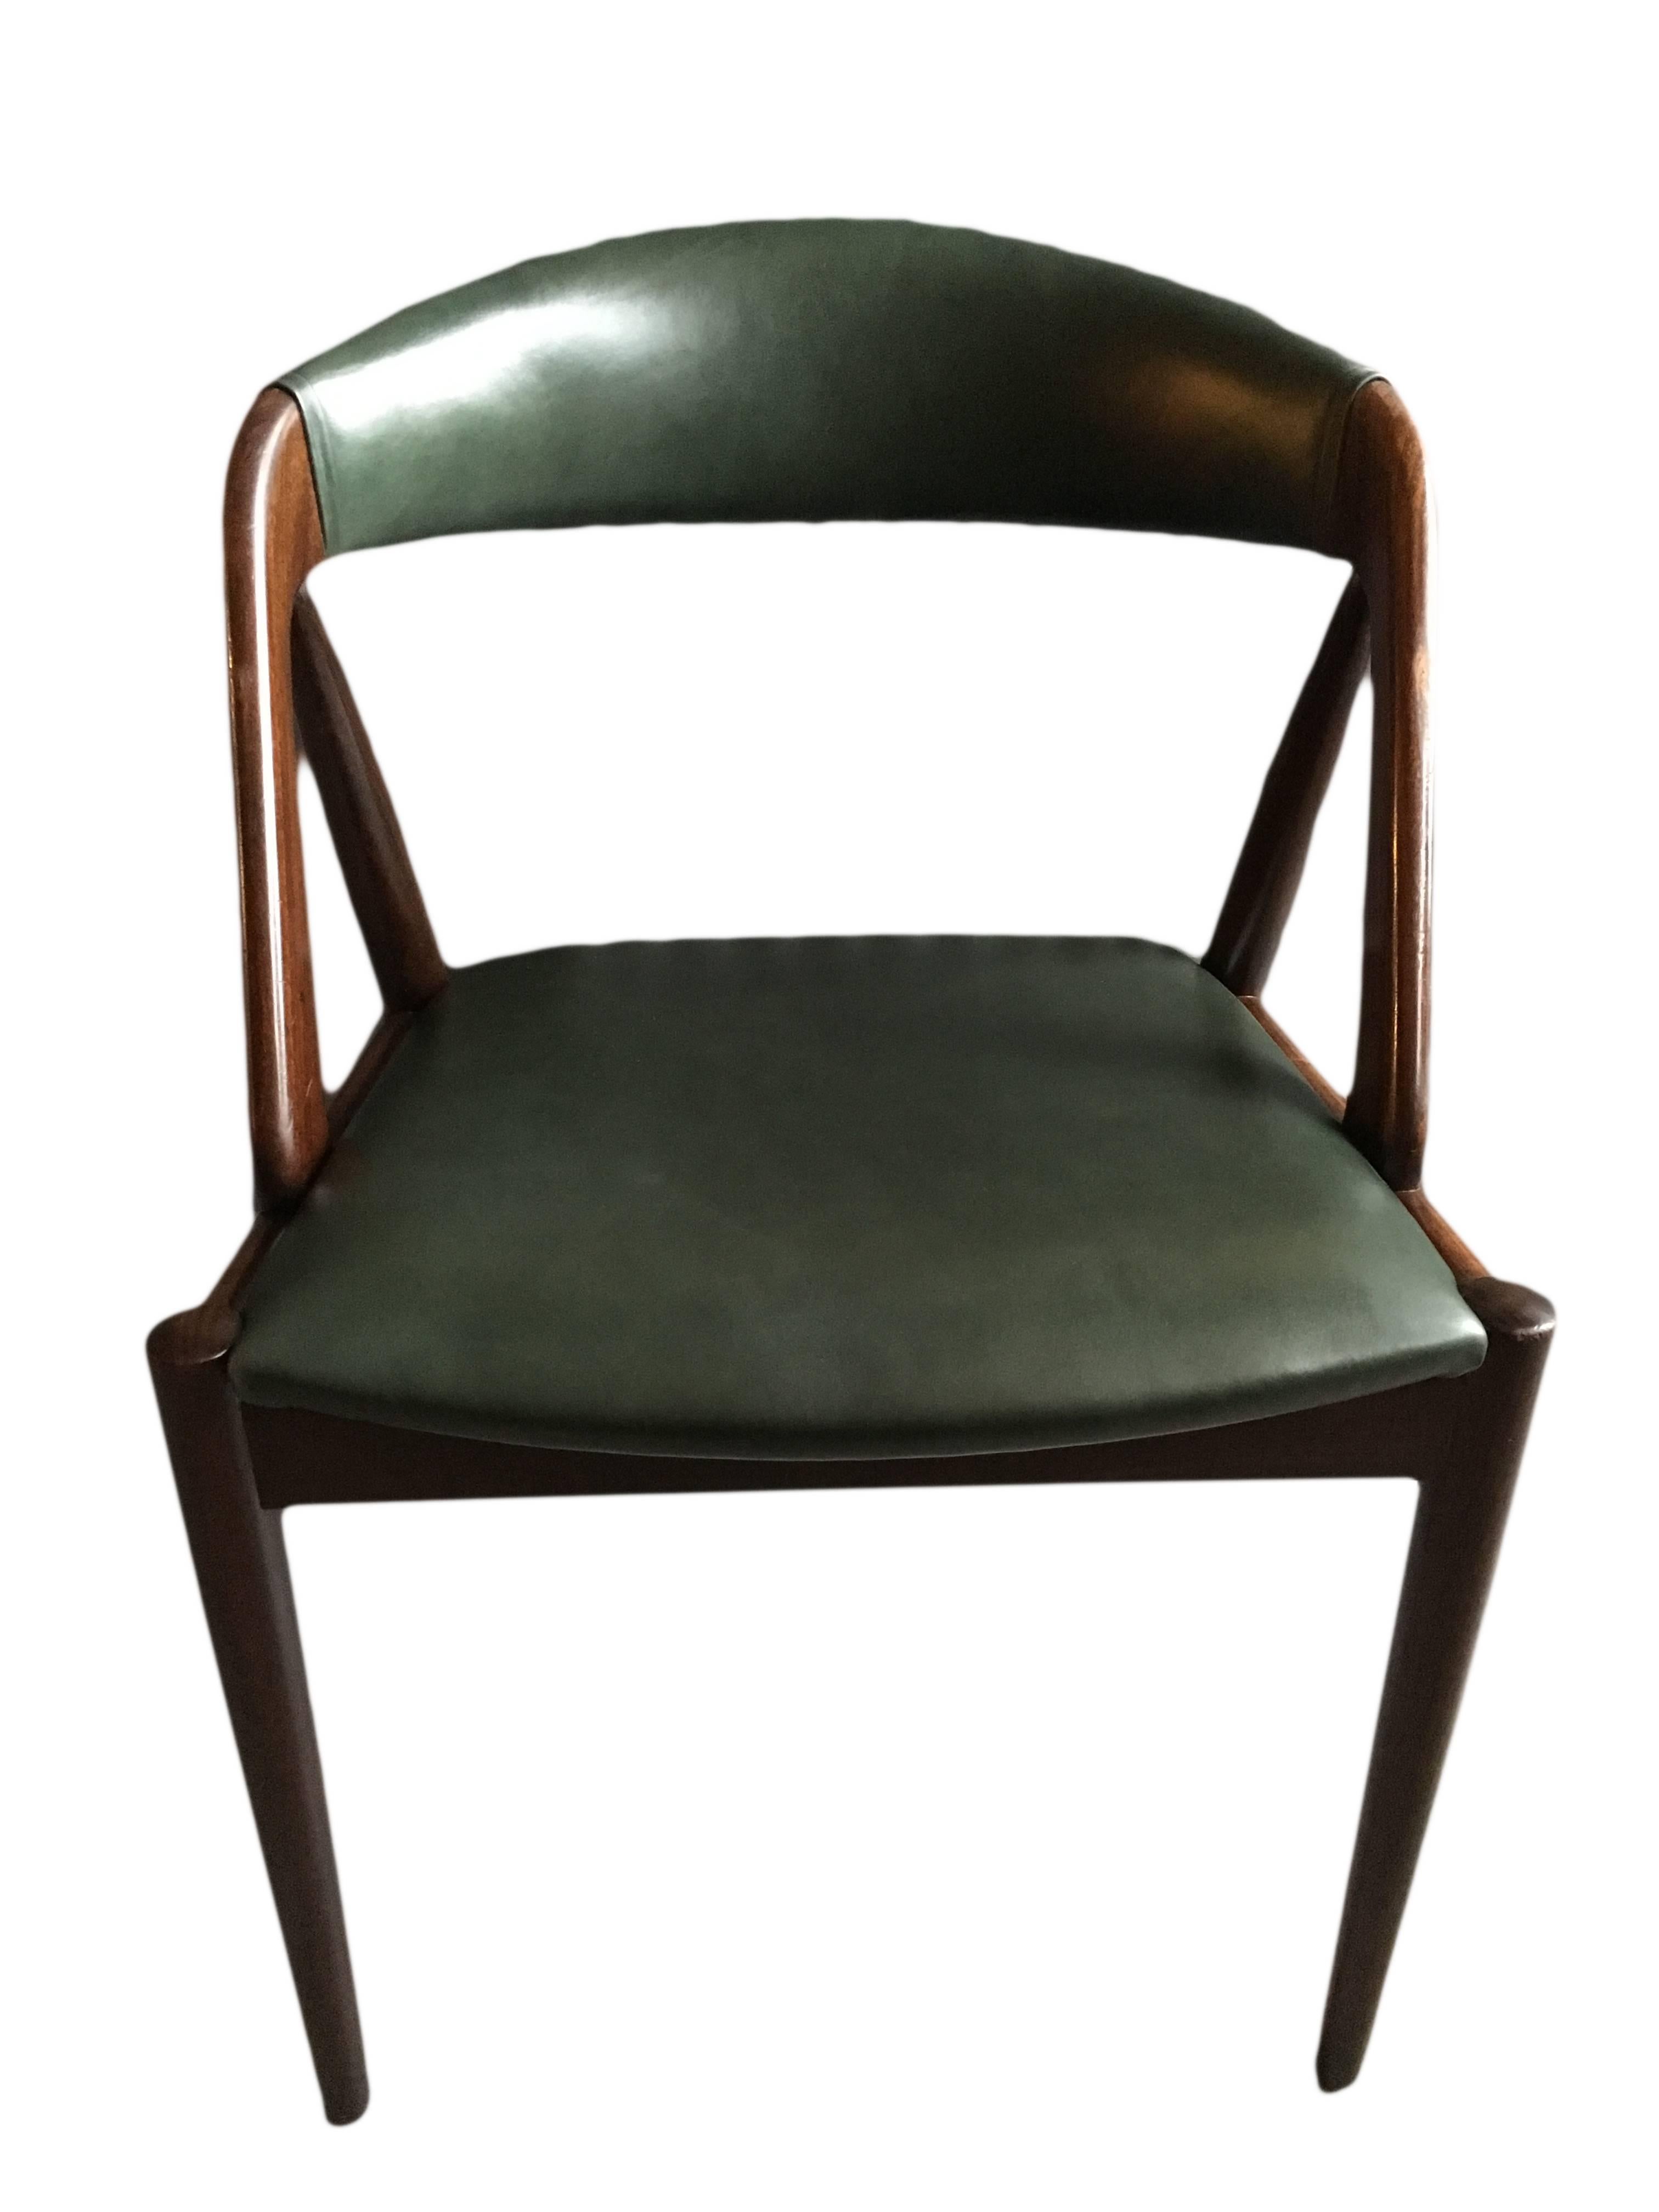 Leather Kai Kristiansen Dining Chairs, model 31, restored set of 4.